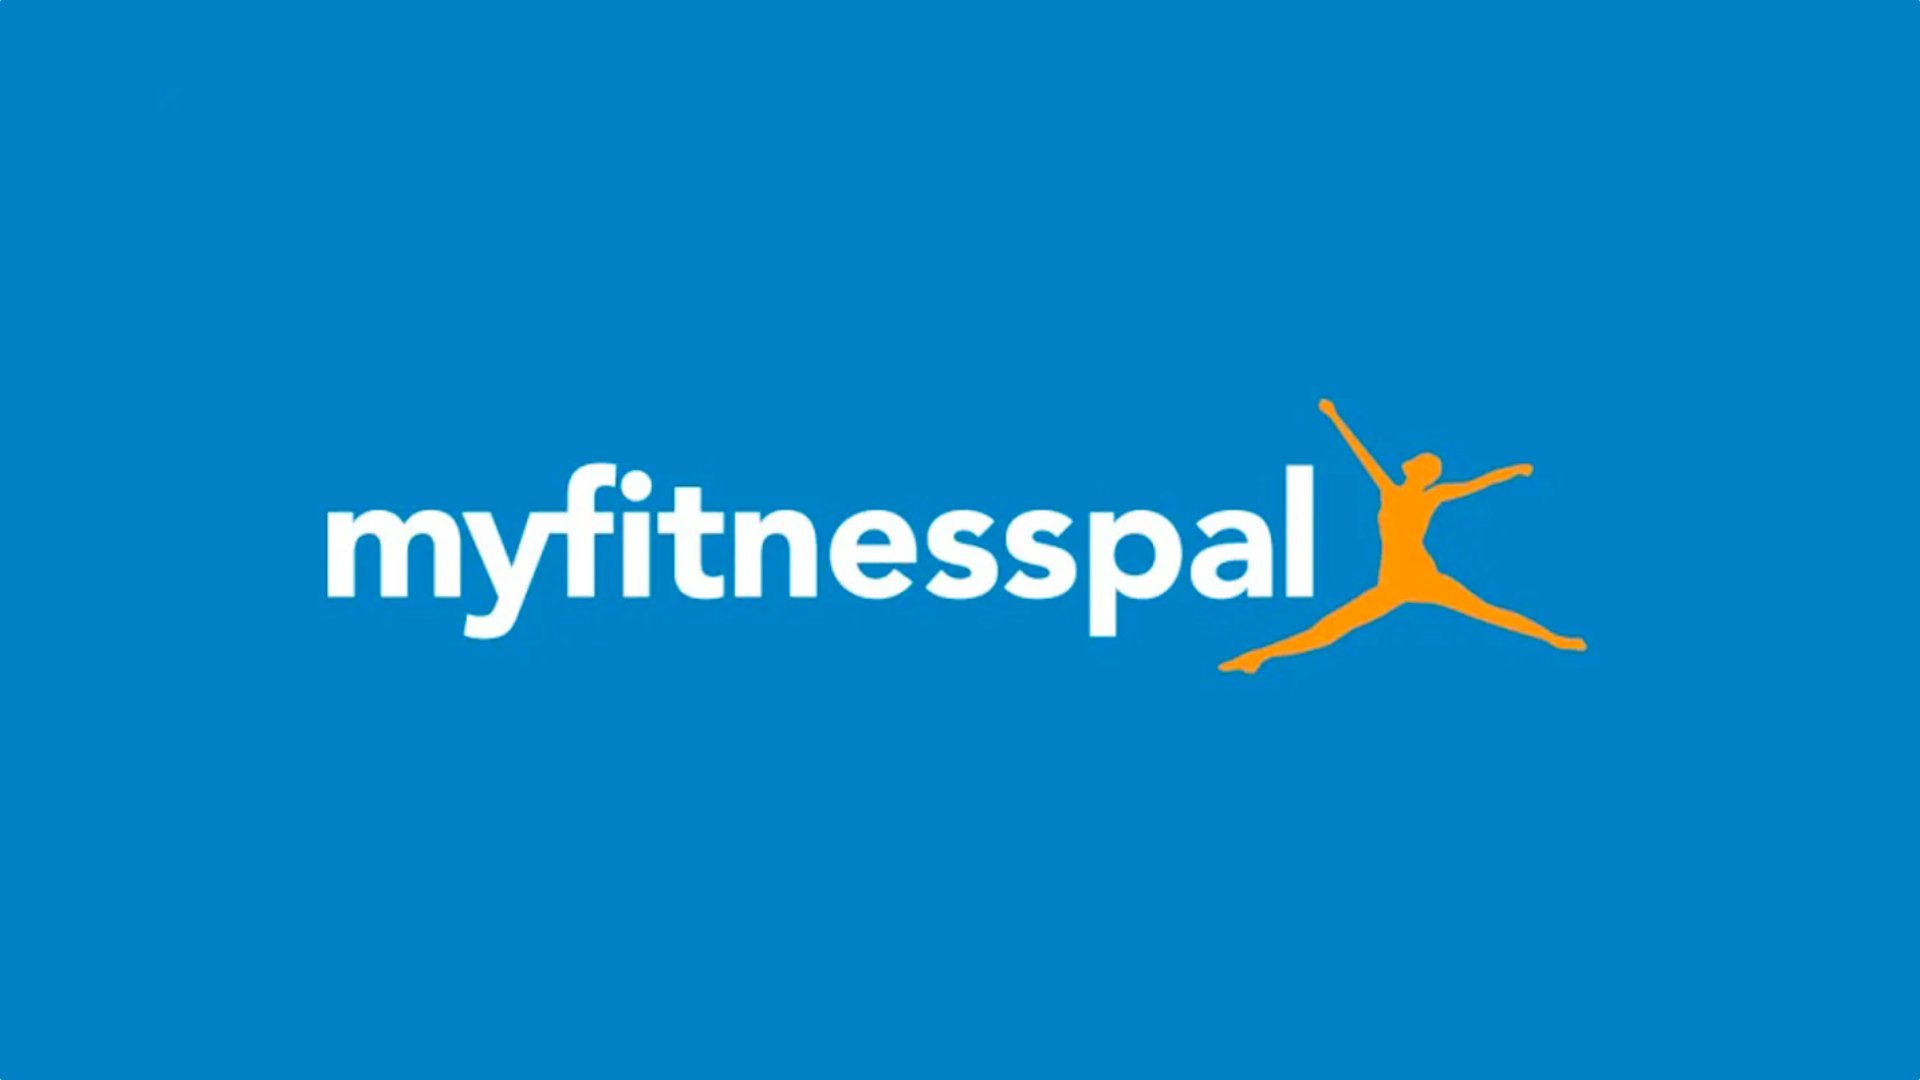 MyFitnessPal app is now available on Galaxy Watches